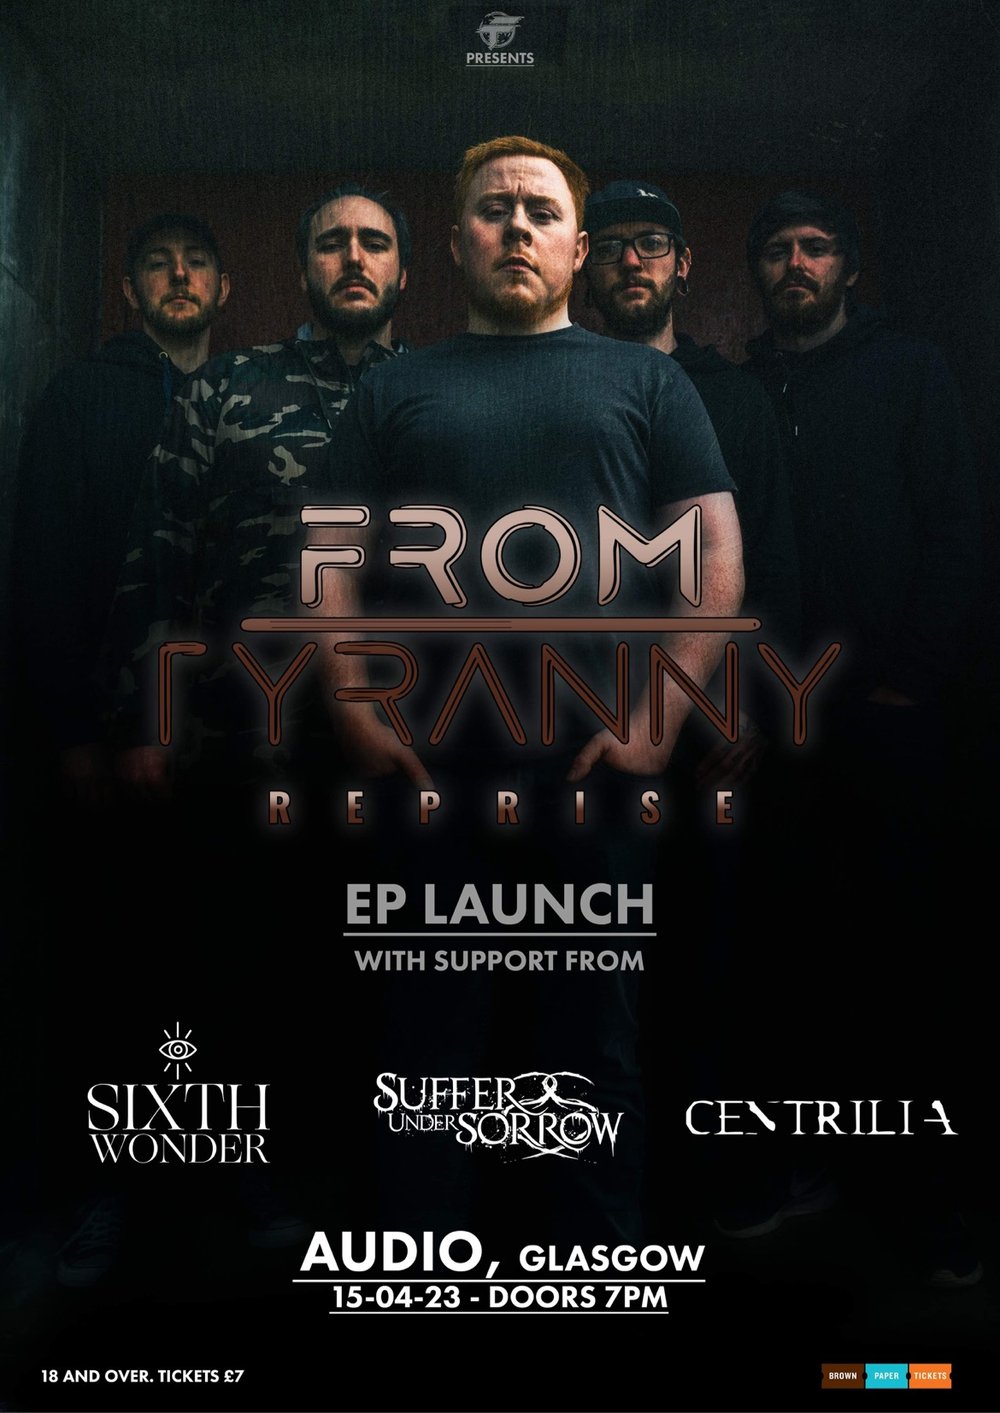 Image of Audio Glasgow - From Tyranny Reprise release show